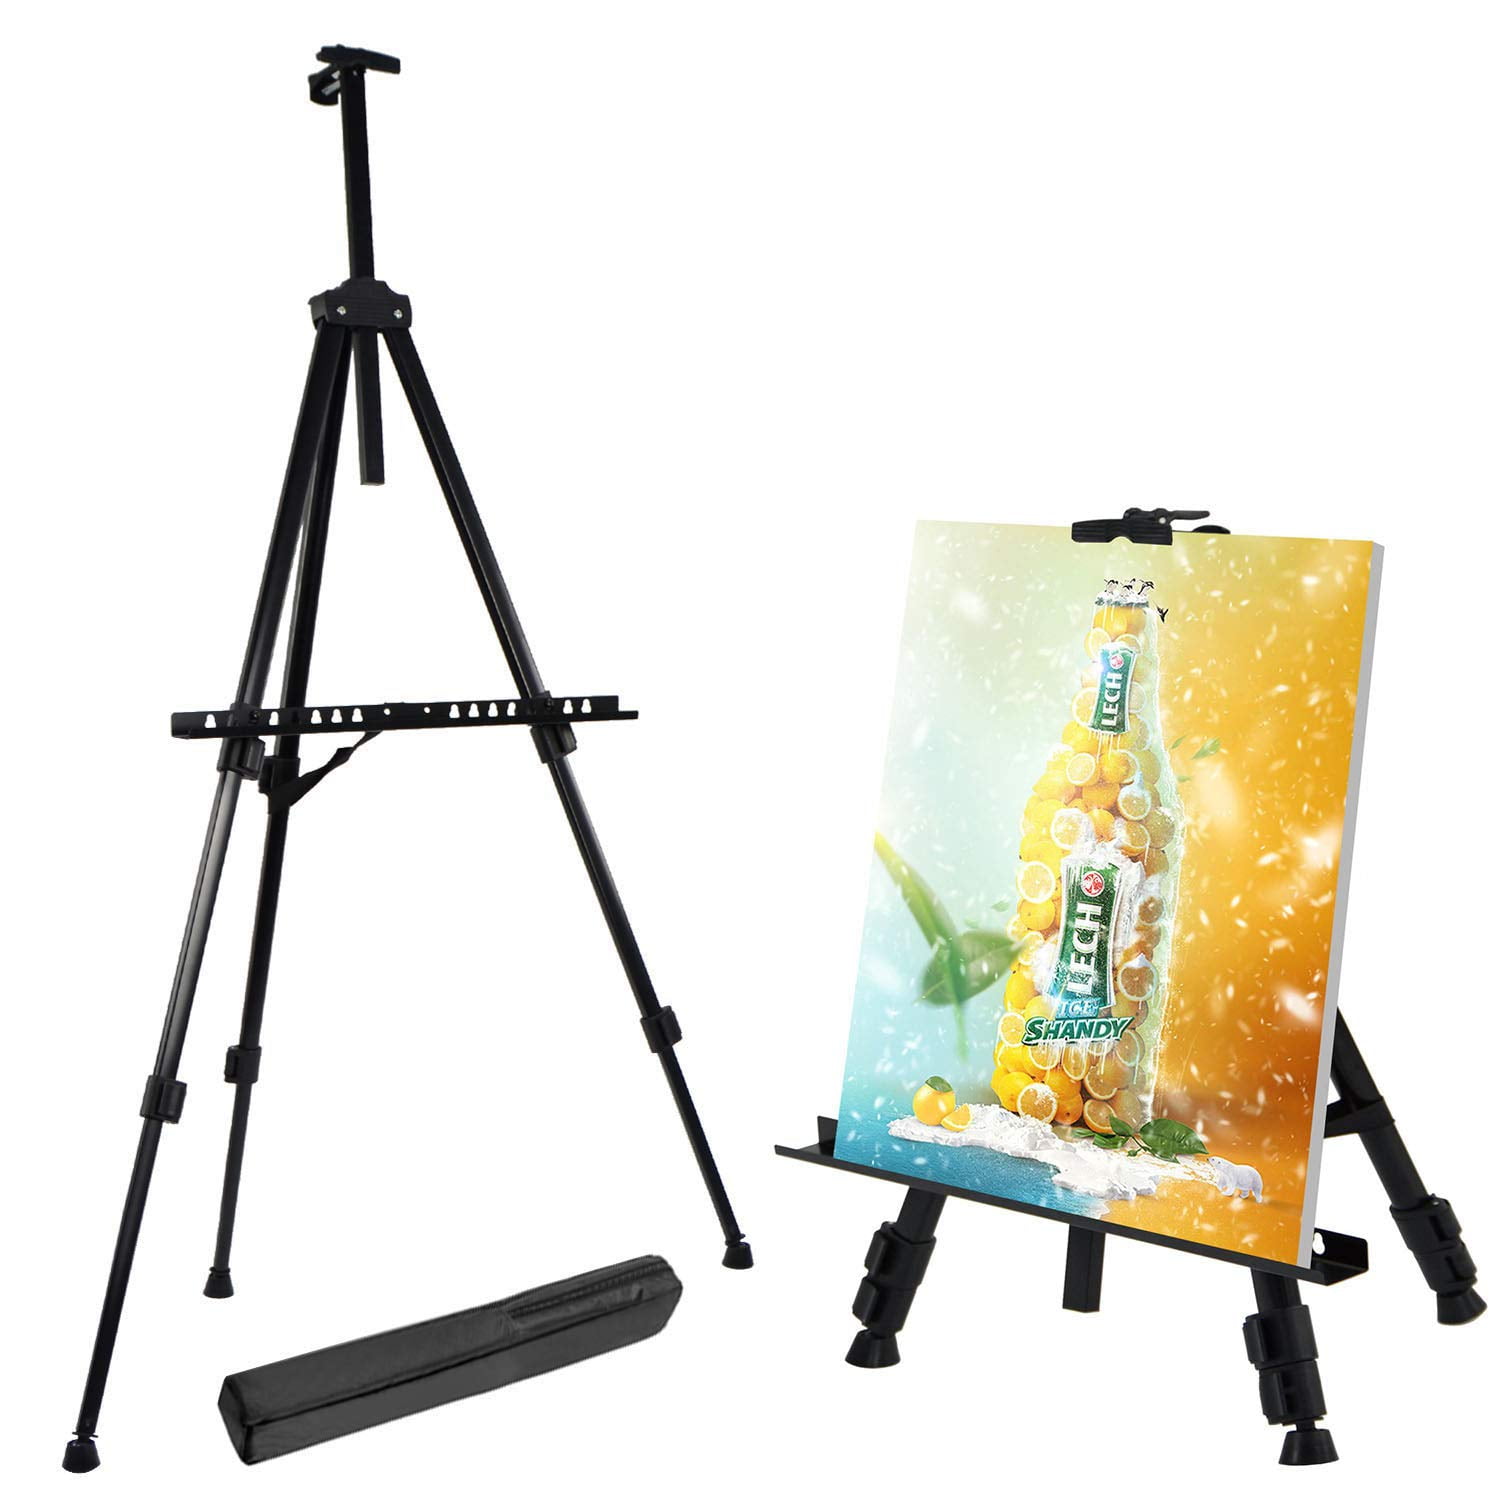 Artist Field Studio Painting/Drawing Easel Tripod Display Stand Canva Adjustable 